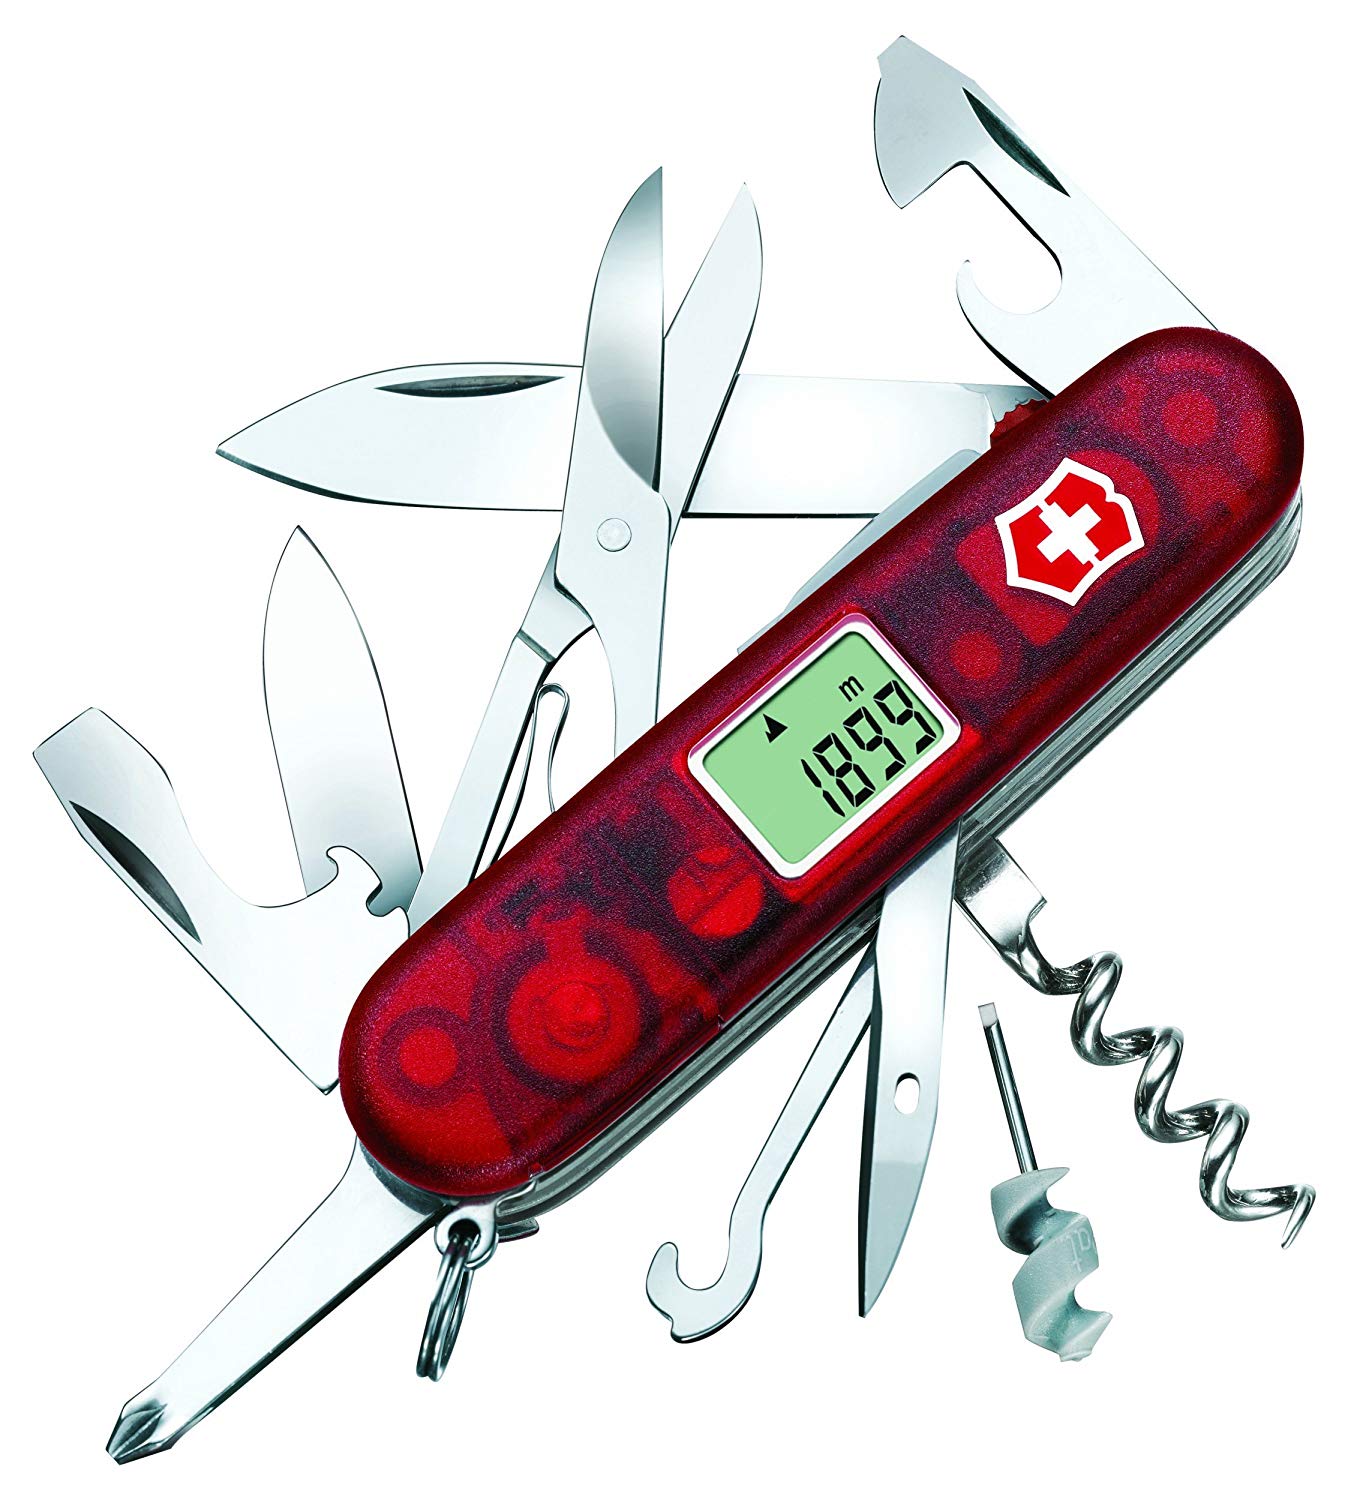 Victorinox Traveller Lite Multi-Tool (Red) as one of the essential camping gear 